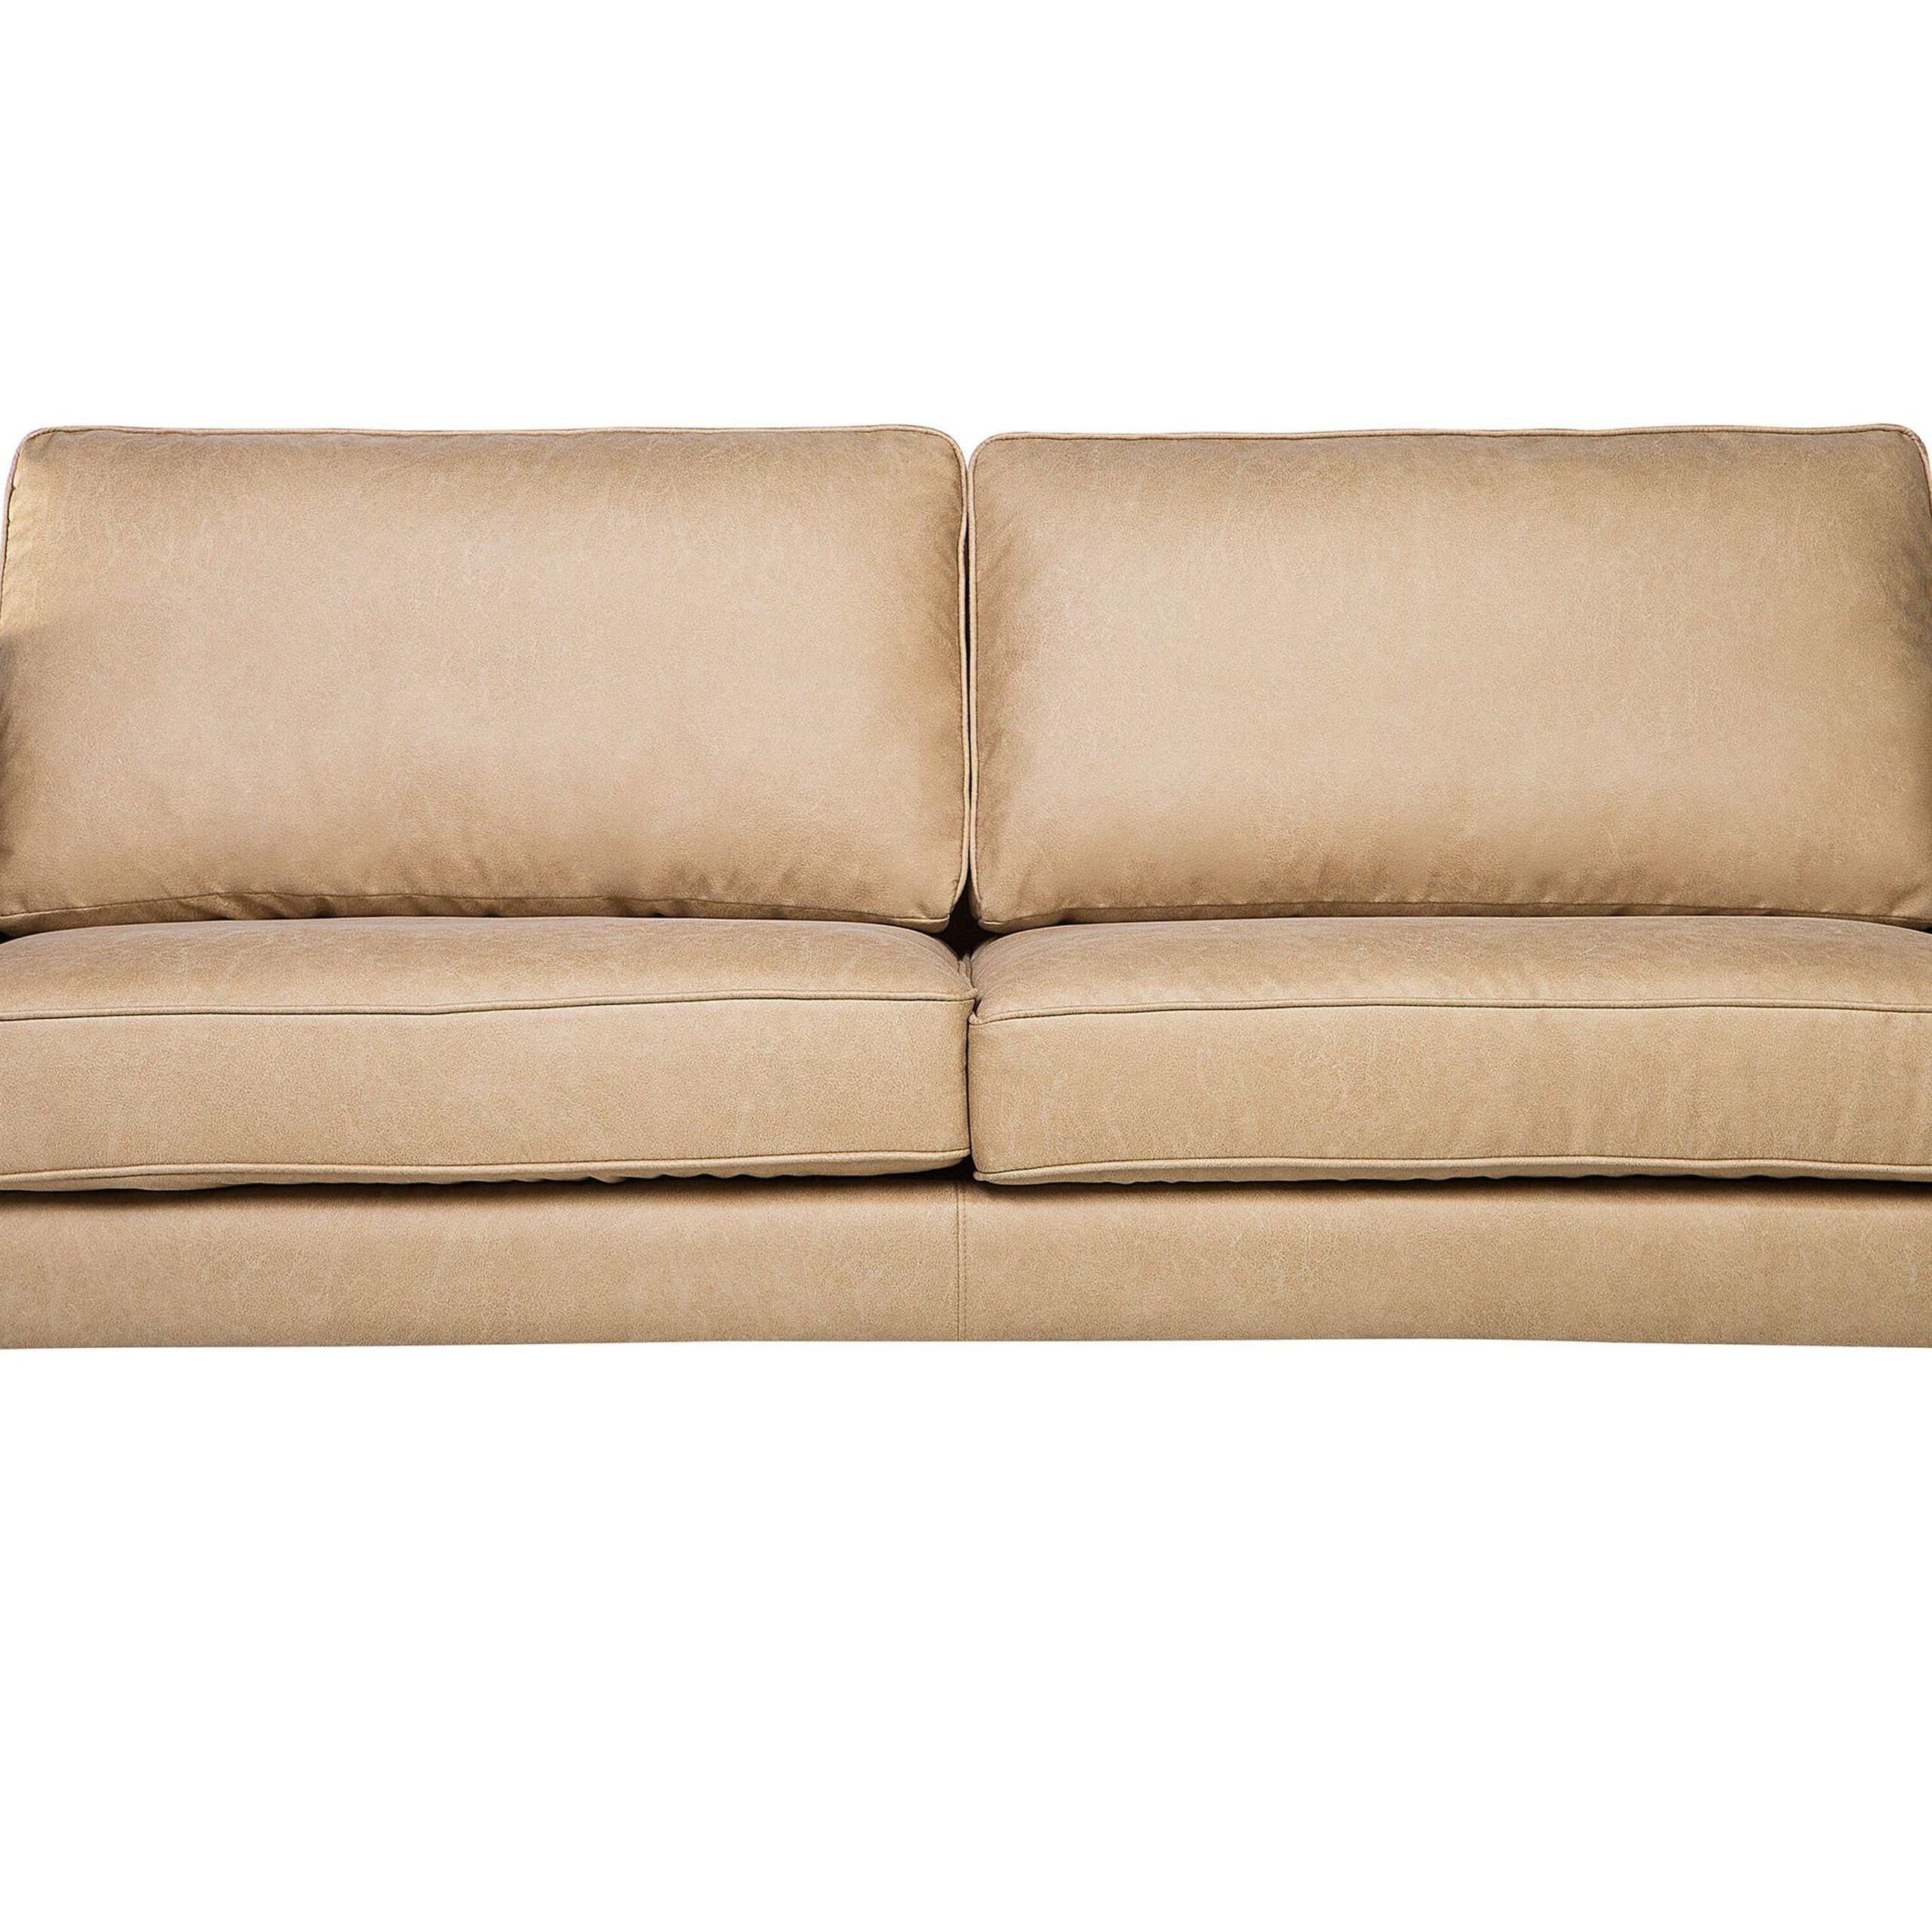 3 Seater Faux Leather Sofa Beige Savalen | Beliani.co.uk Within Traditional 3 Seater Faux Leather Sofas (Gallery 3 of 20)